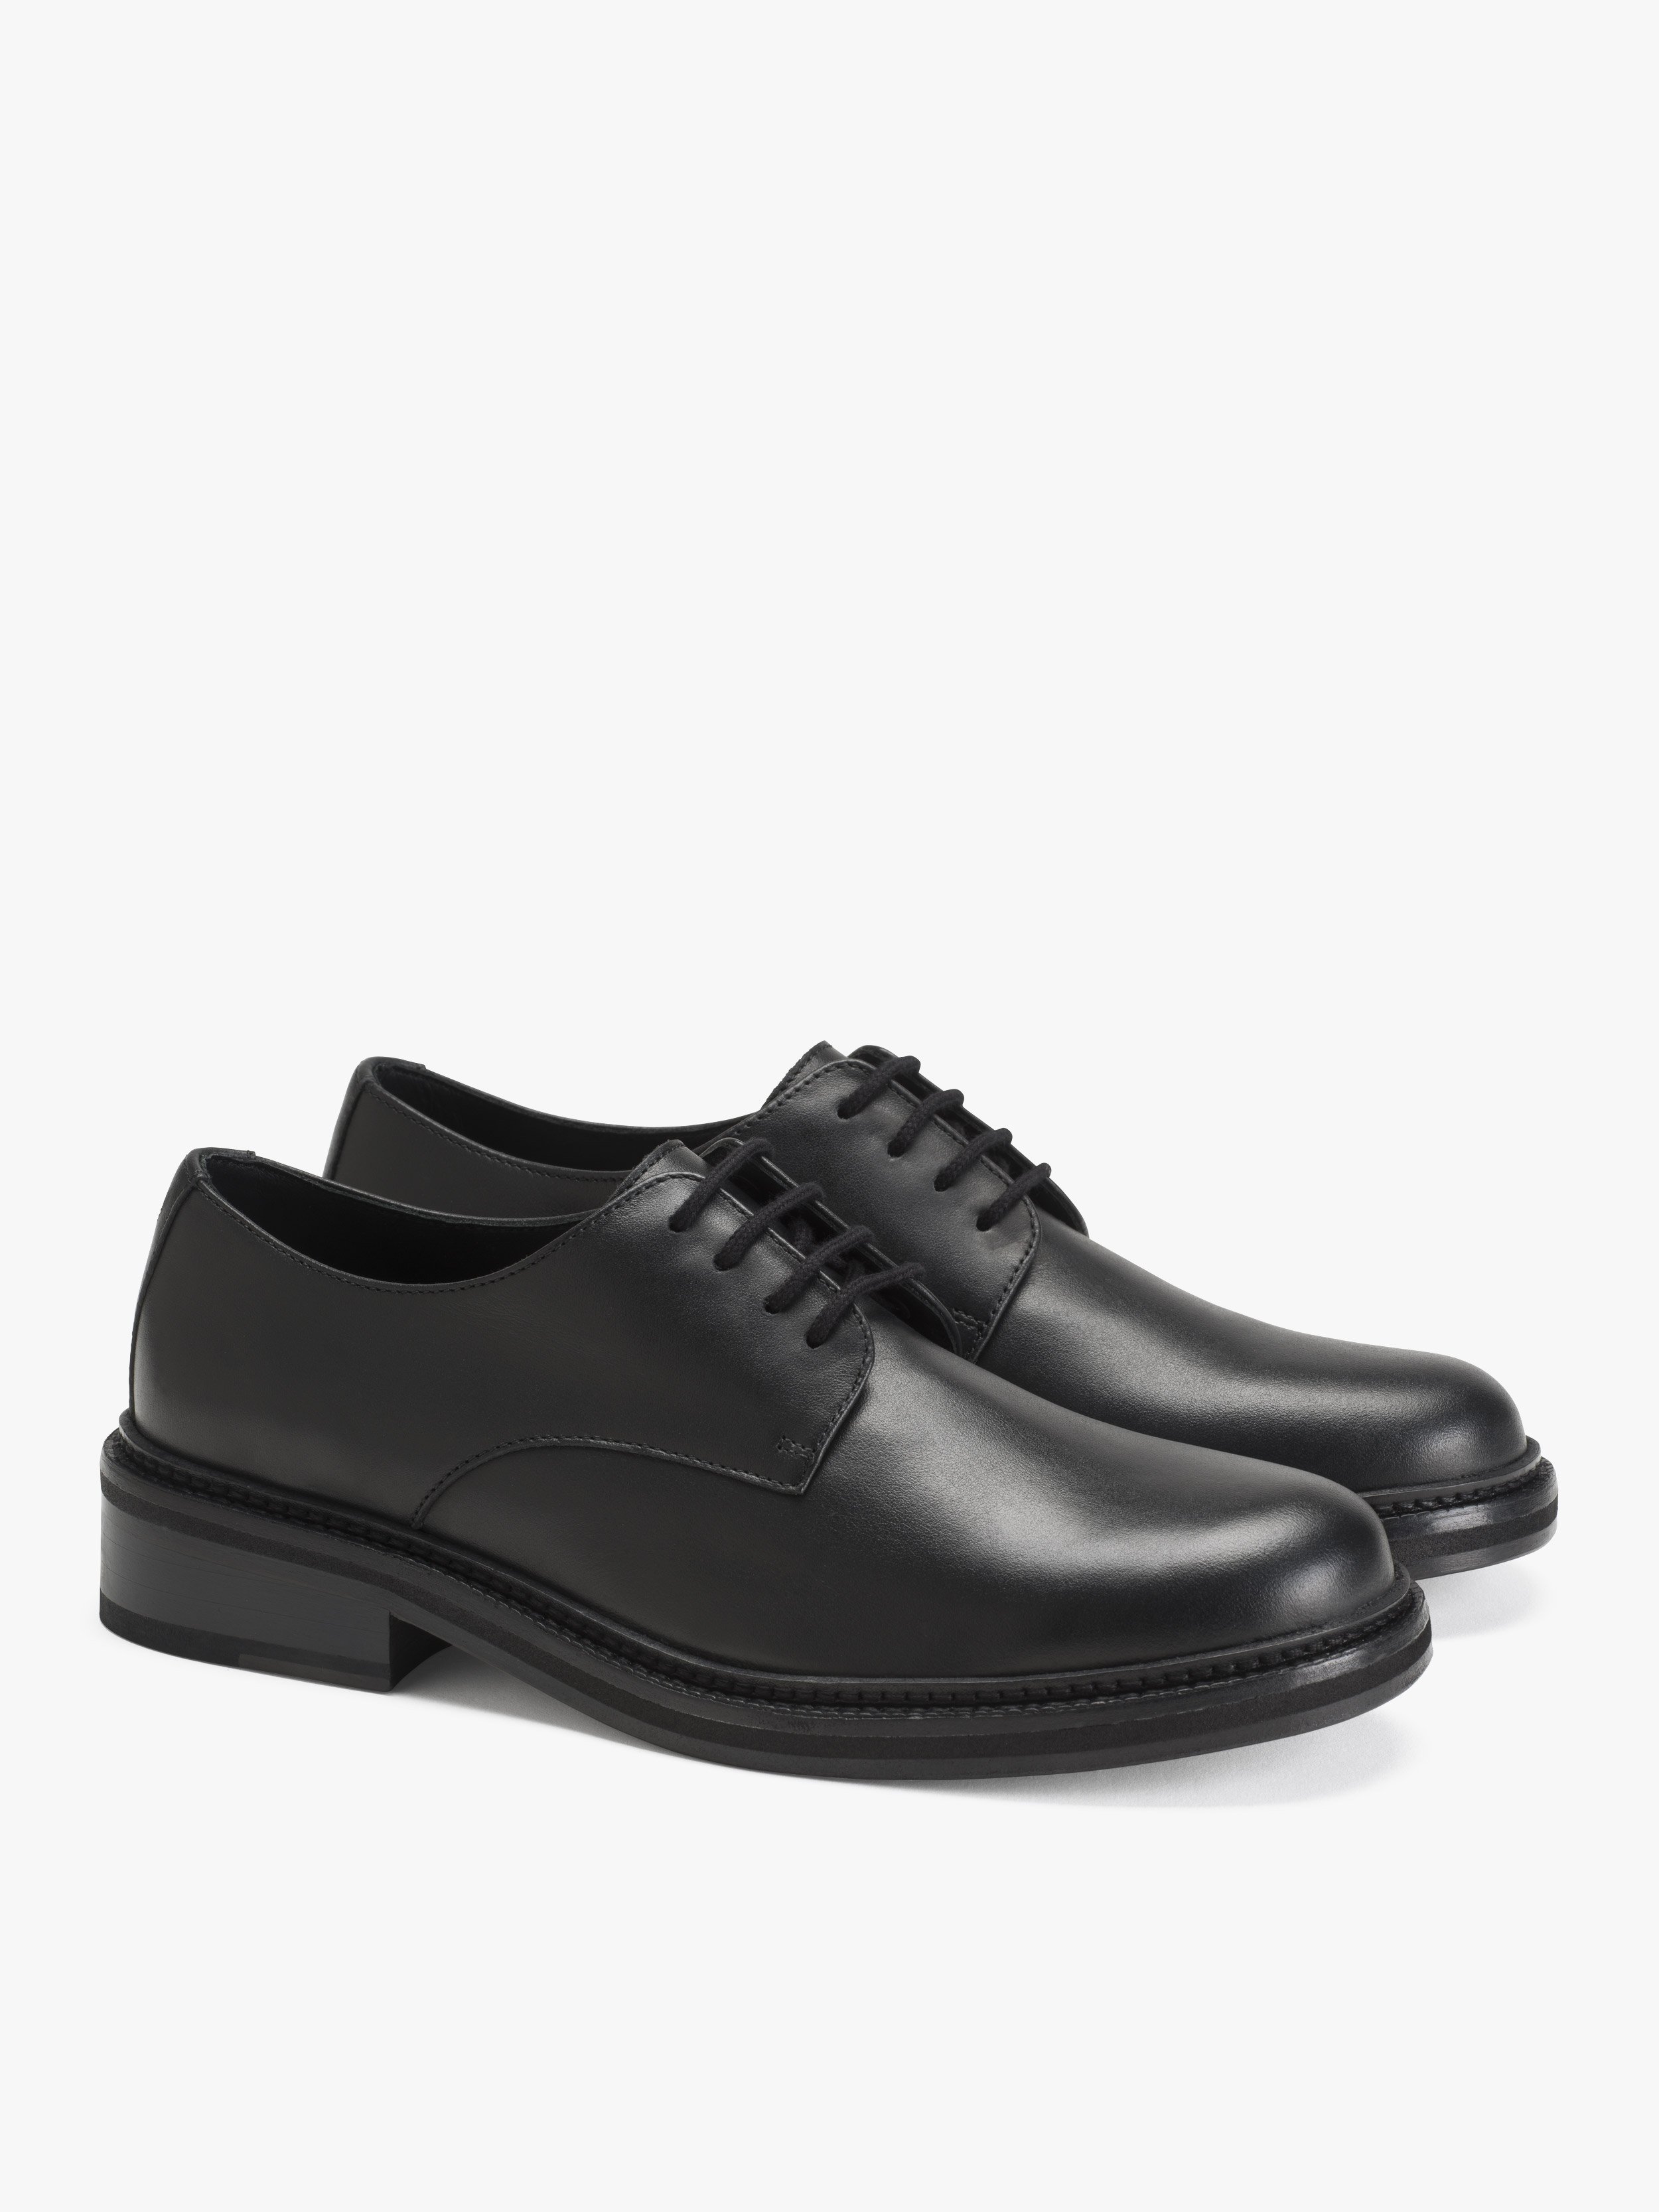 Cook lightly Pidgin Leather Derby Shoes Slovakia, SAVE 41% - mpgc.net